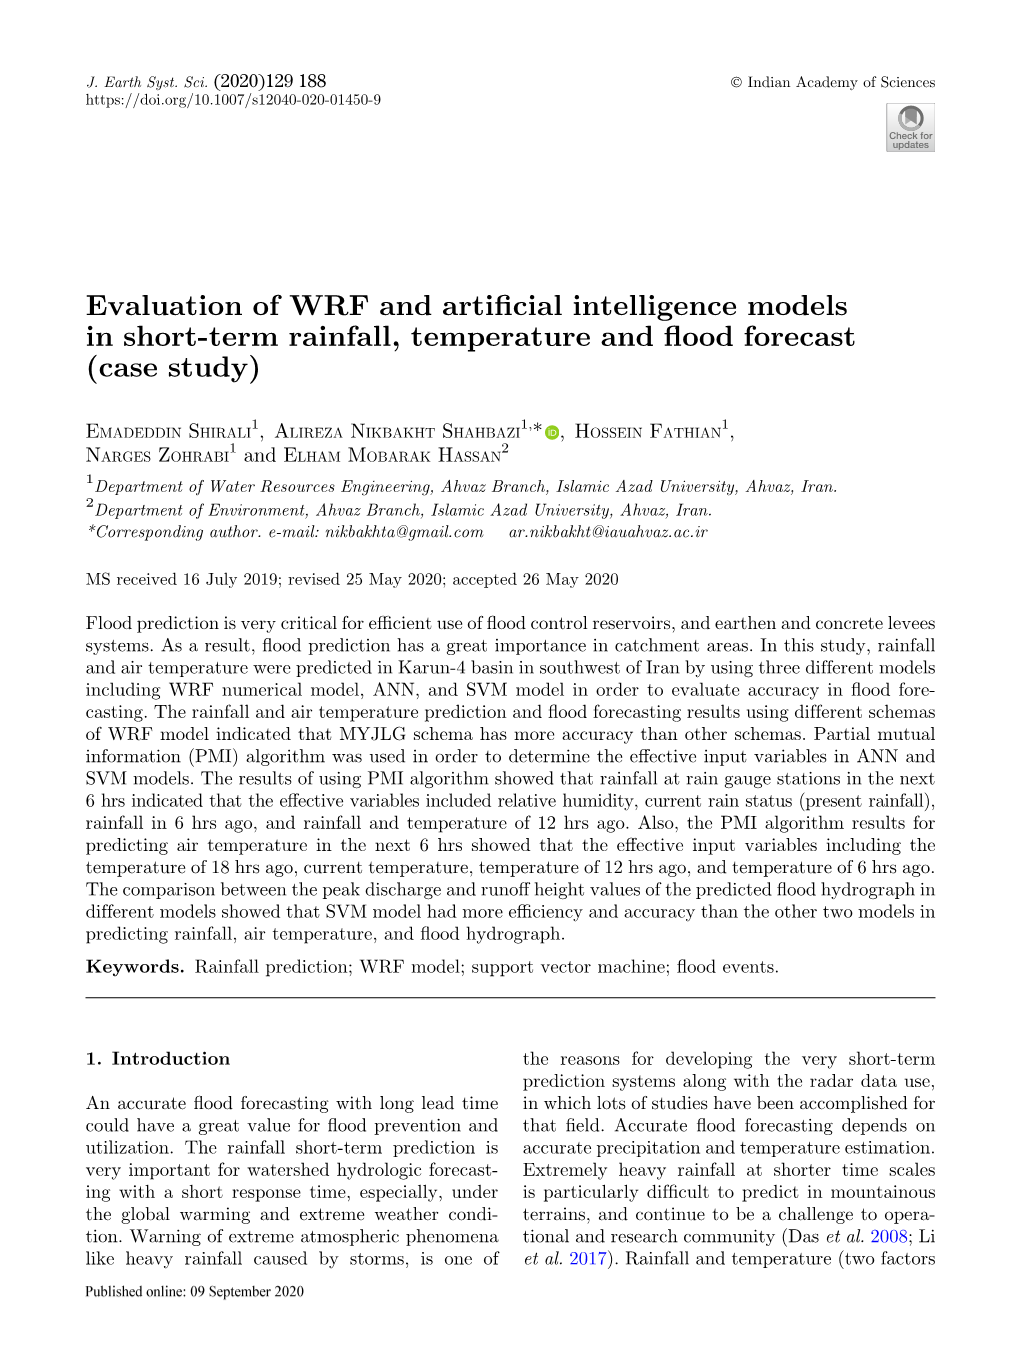 Evaluation of WRF and Artificial Intelligence Models in Short-Term